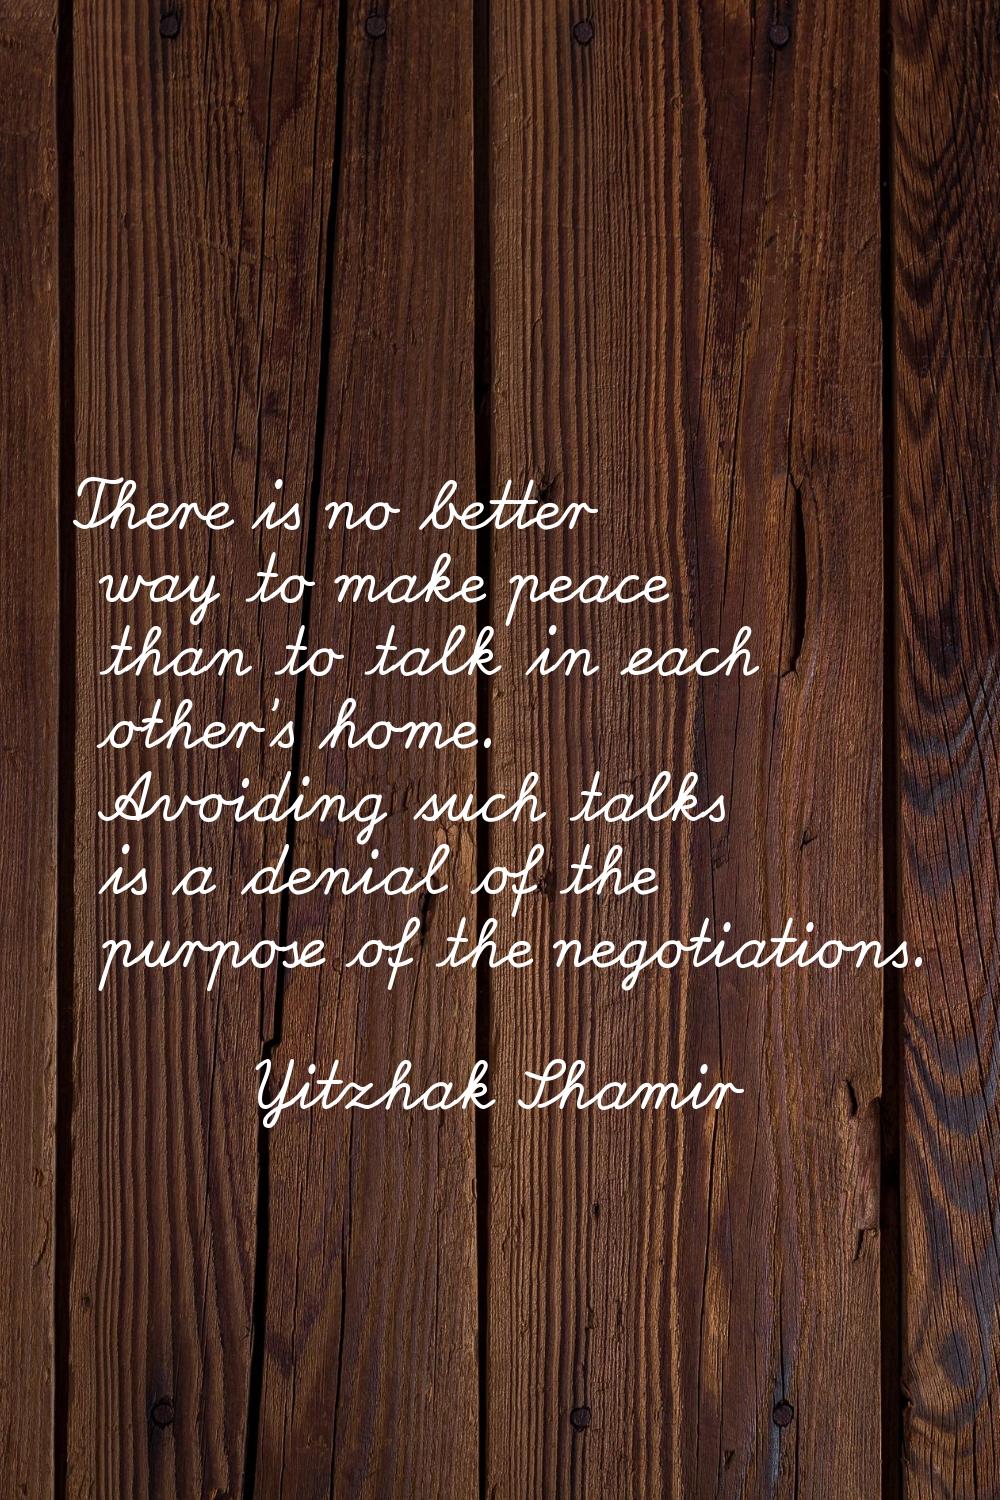 There is no better way to make peace than to talk in each other's home. Avoiding such talks is a de